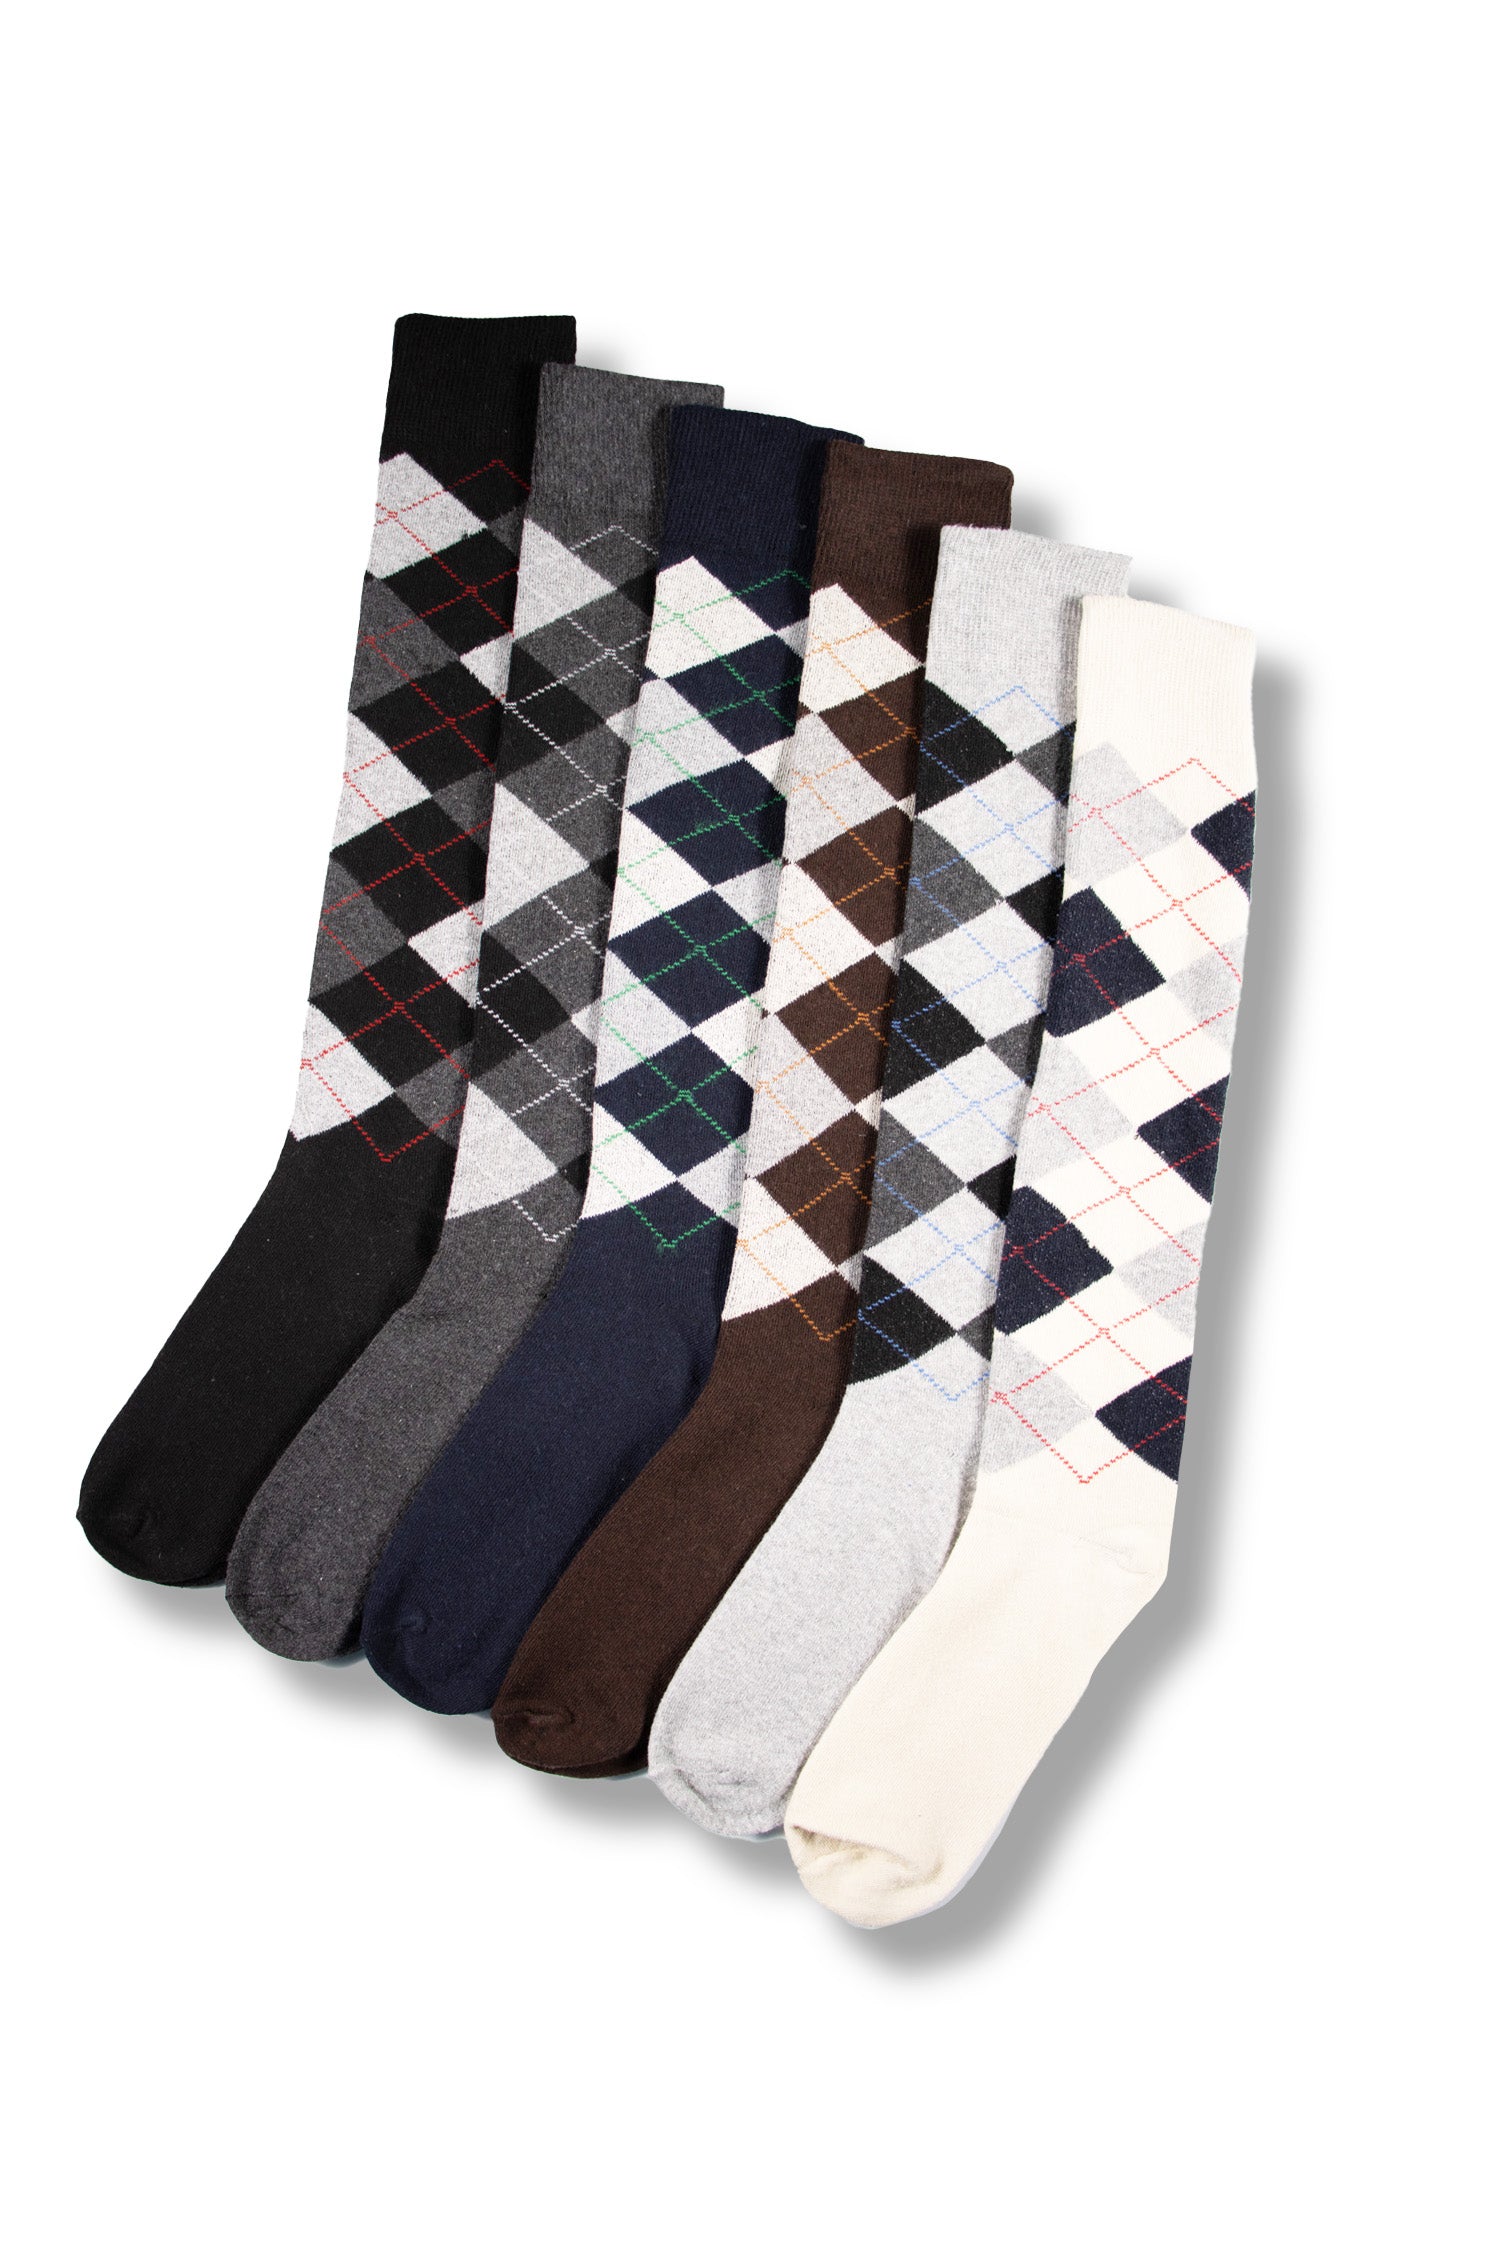 Mens Knee High Long Hose Argyle Socks - Assorted Colours (Greys, Brown and Creams) (4 Pack)